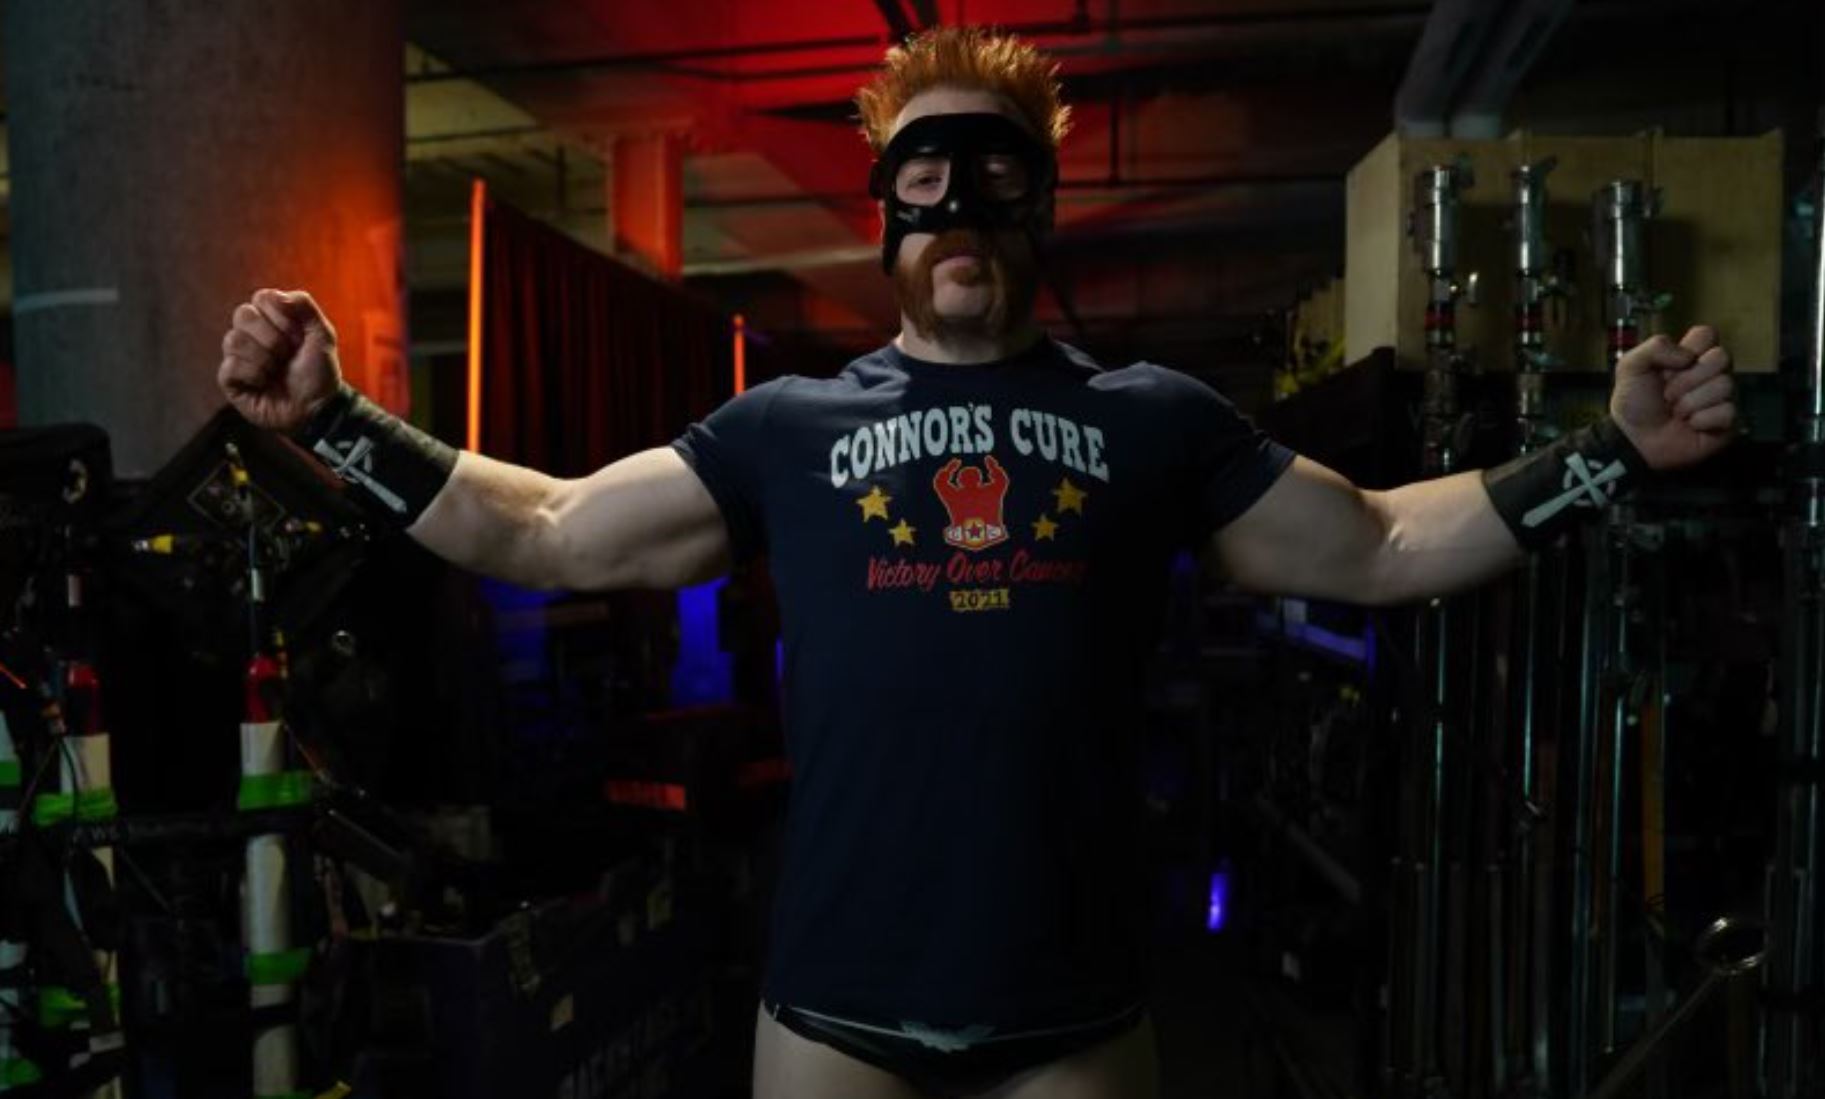 sheamus had surgery recently